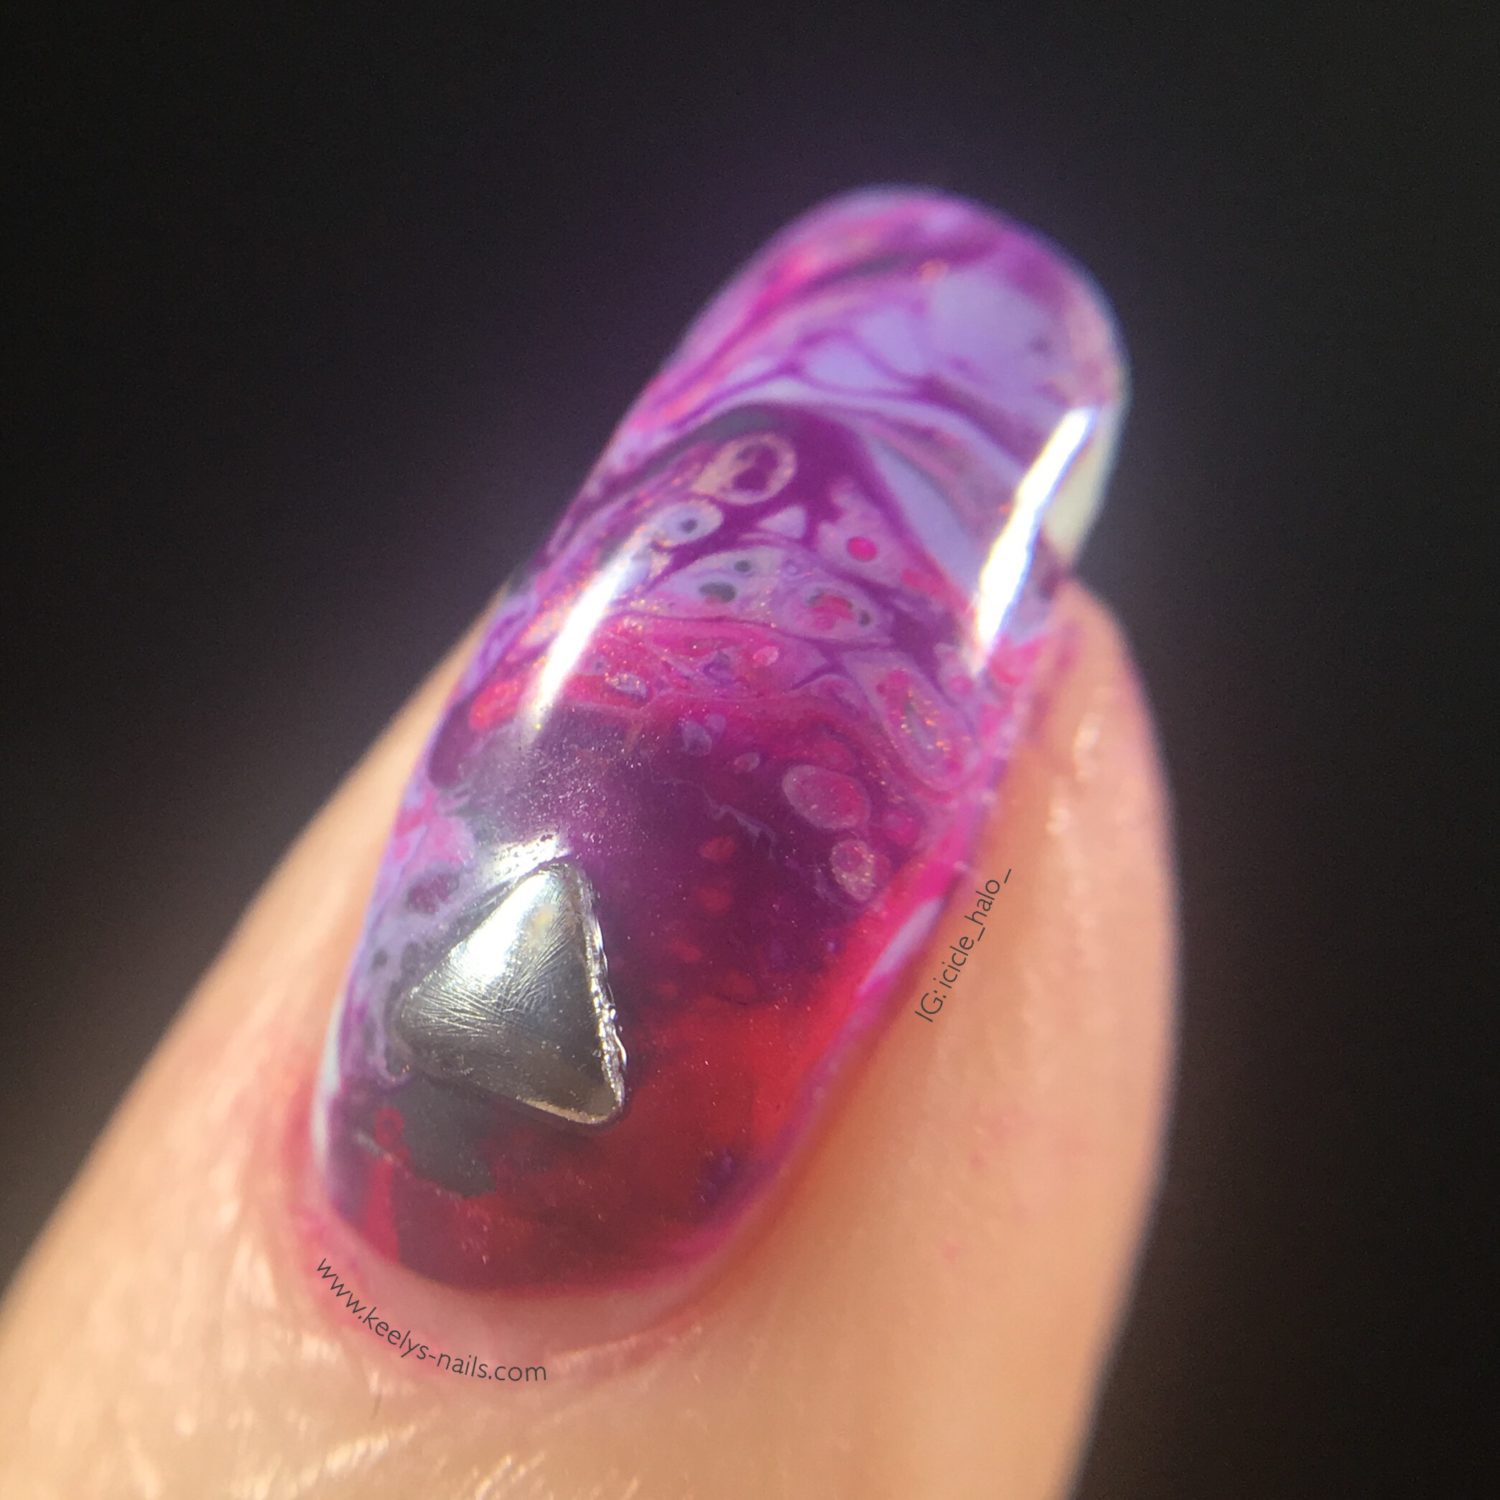 My cuticles need a bit of attention, but the cells I've created are mesmerising!